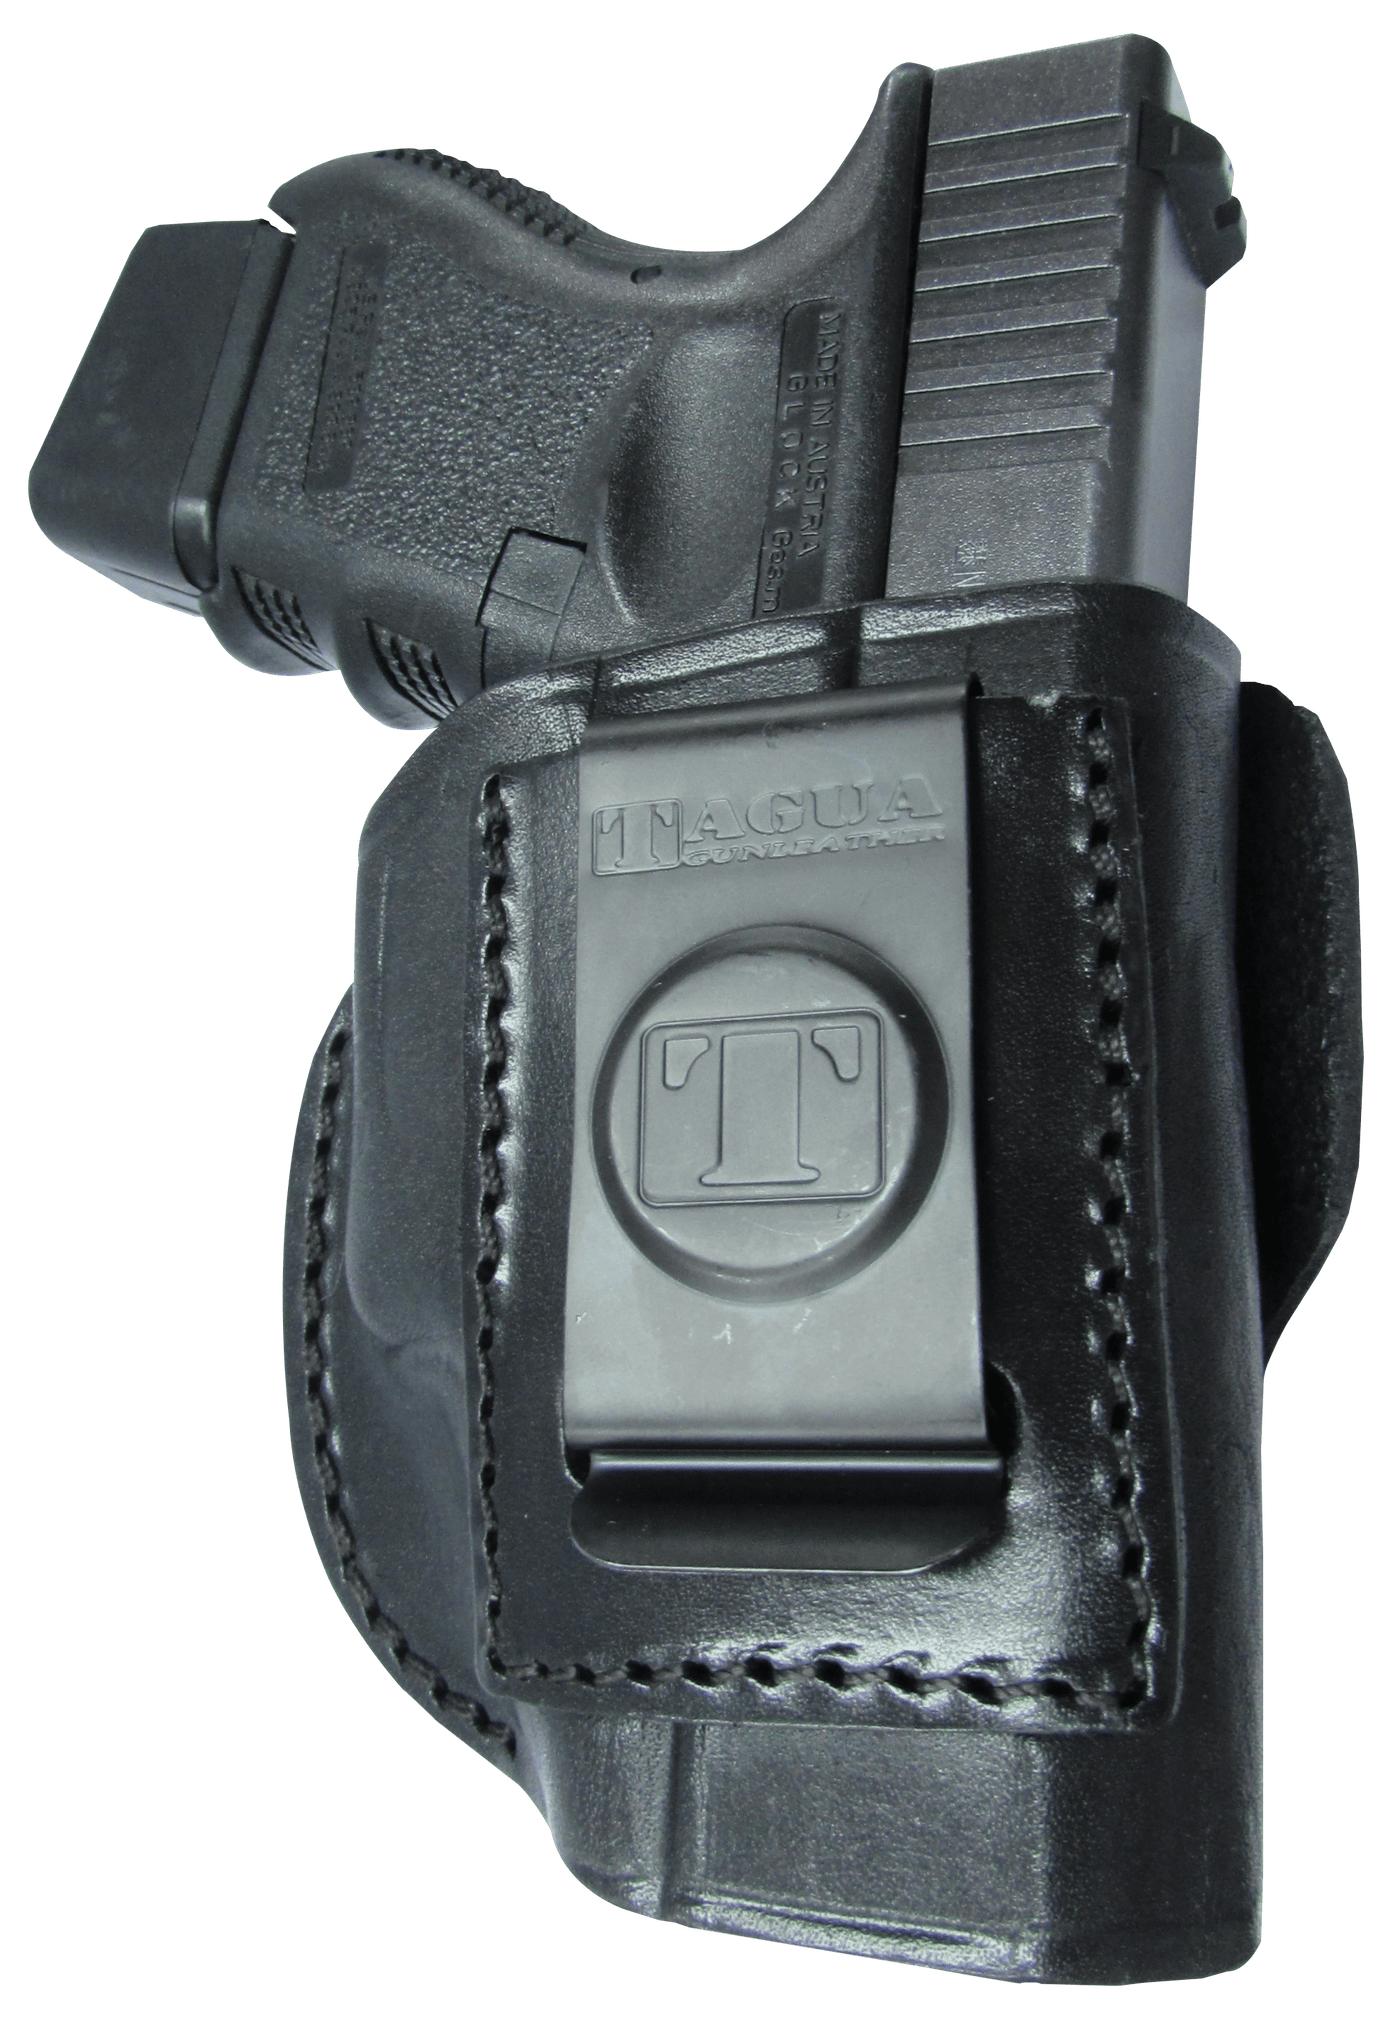 Tagua Tagua 4 In 1 Inside The Pant - Holster Spfd Xd 9/40 Blk Rh Holsters And Related Items